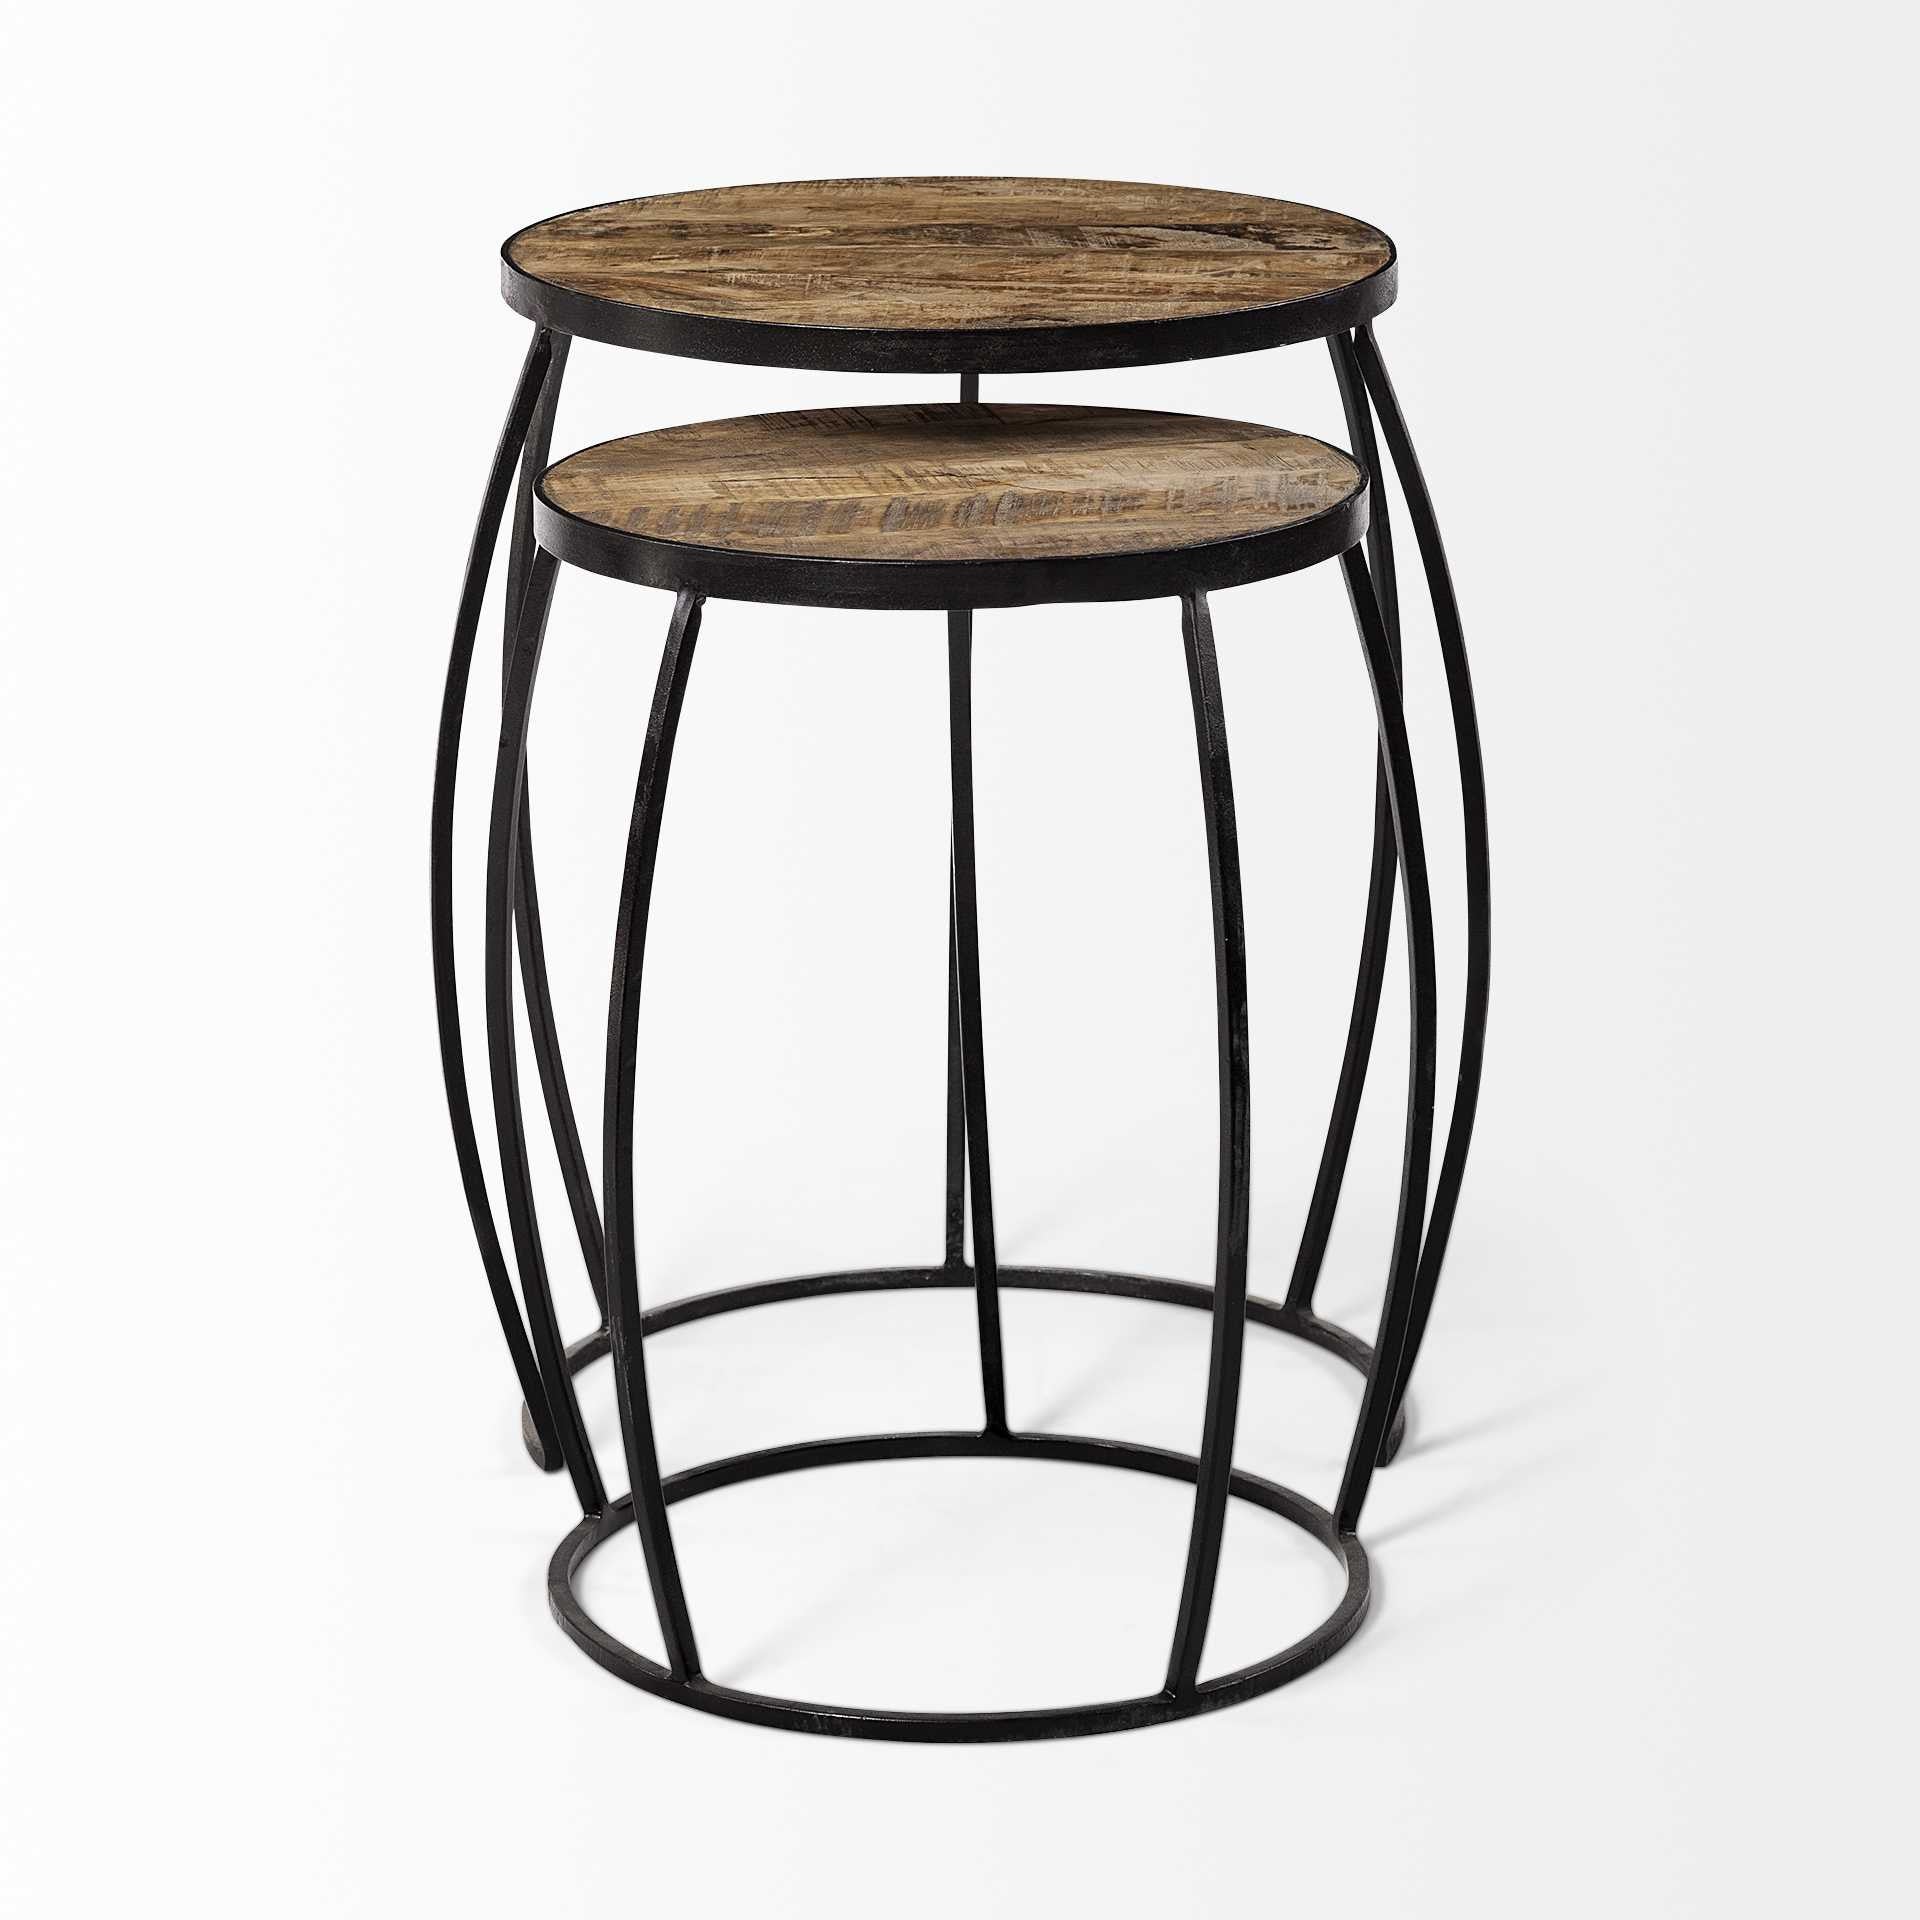 Set of Two 26" Black And Brown Solid Wood Round End Table